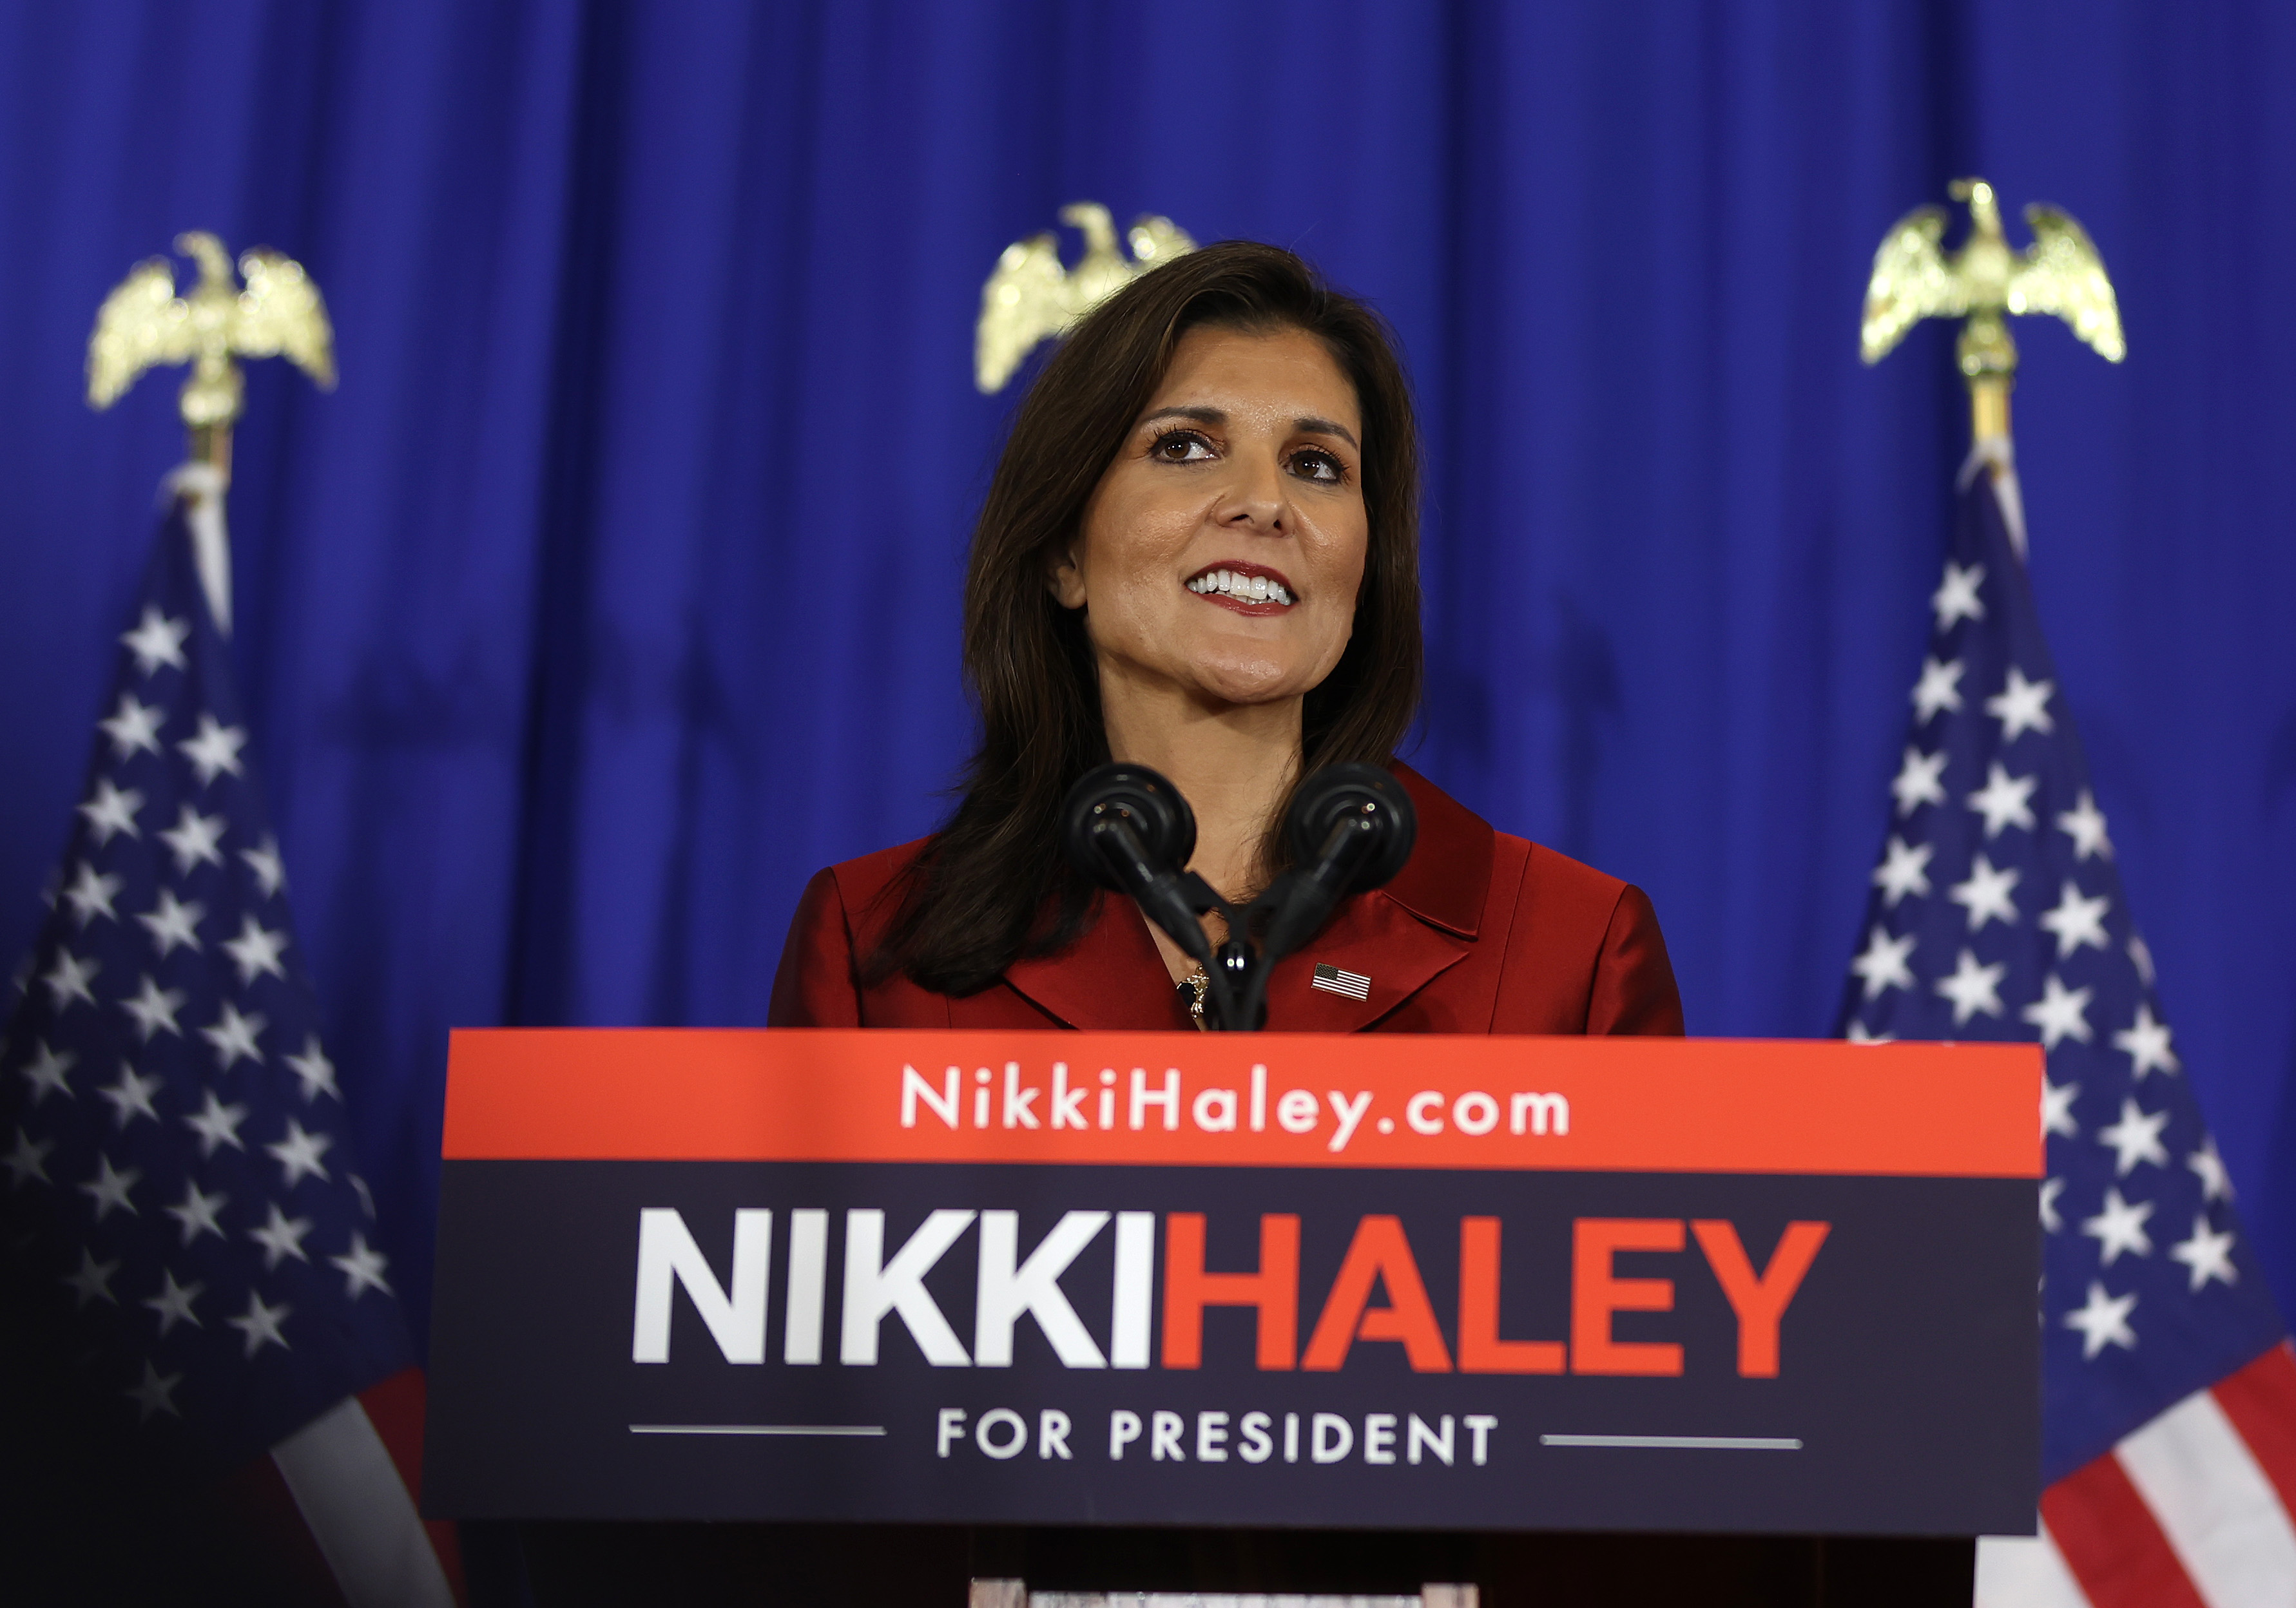 MAGA Mocks Nikki Haley for Stinging Defeat in Home State